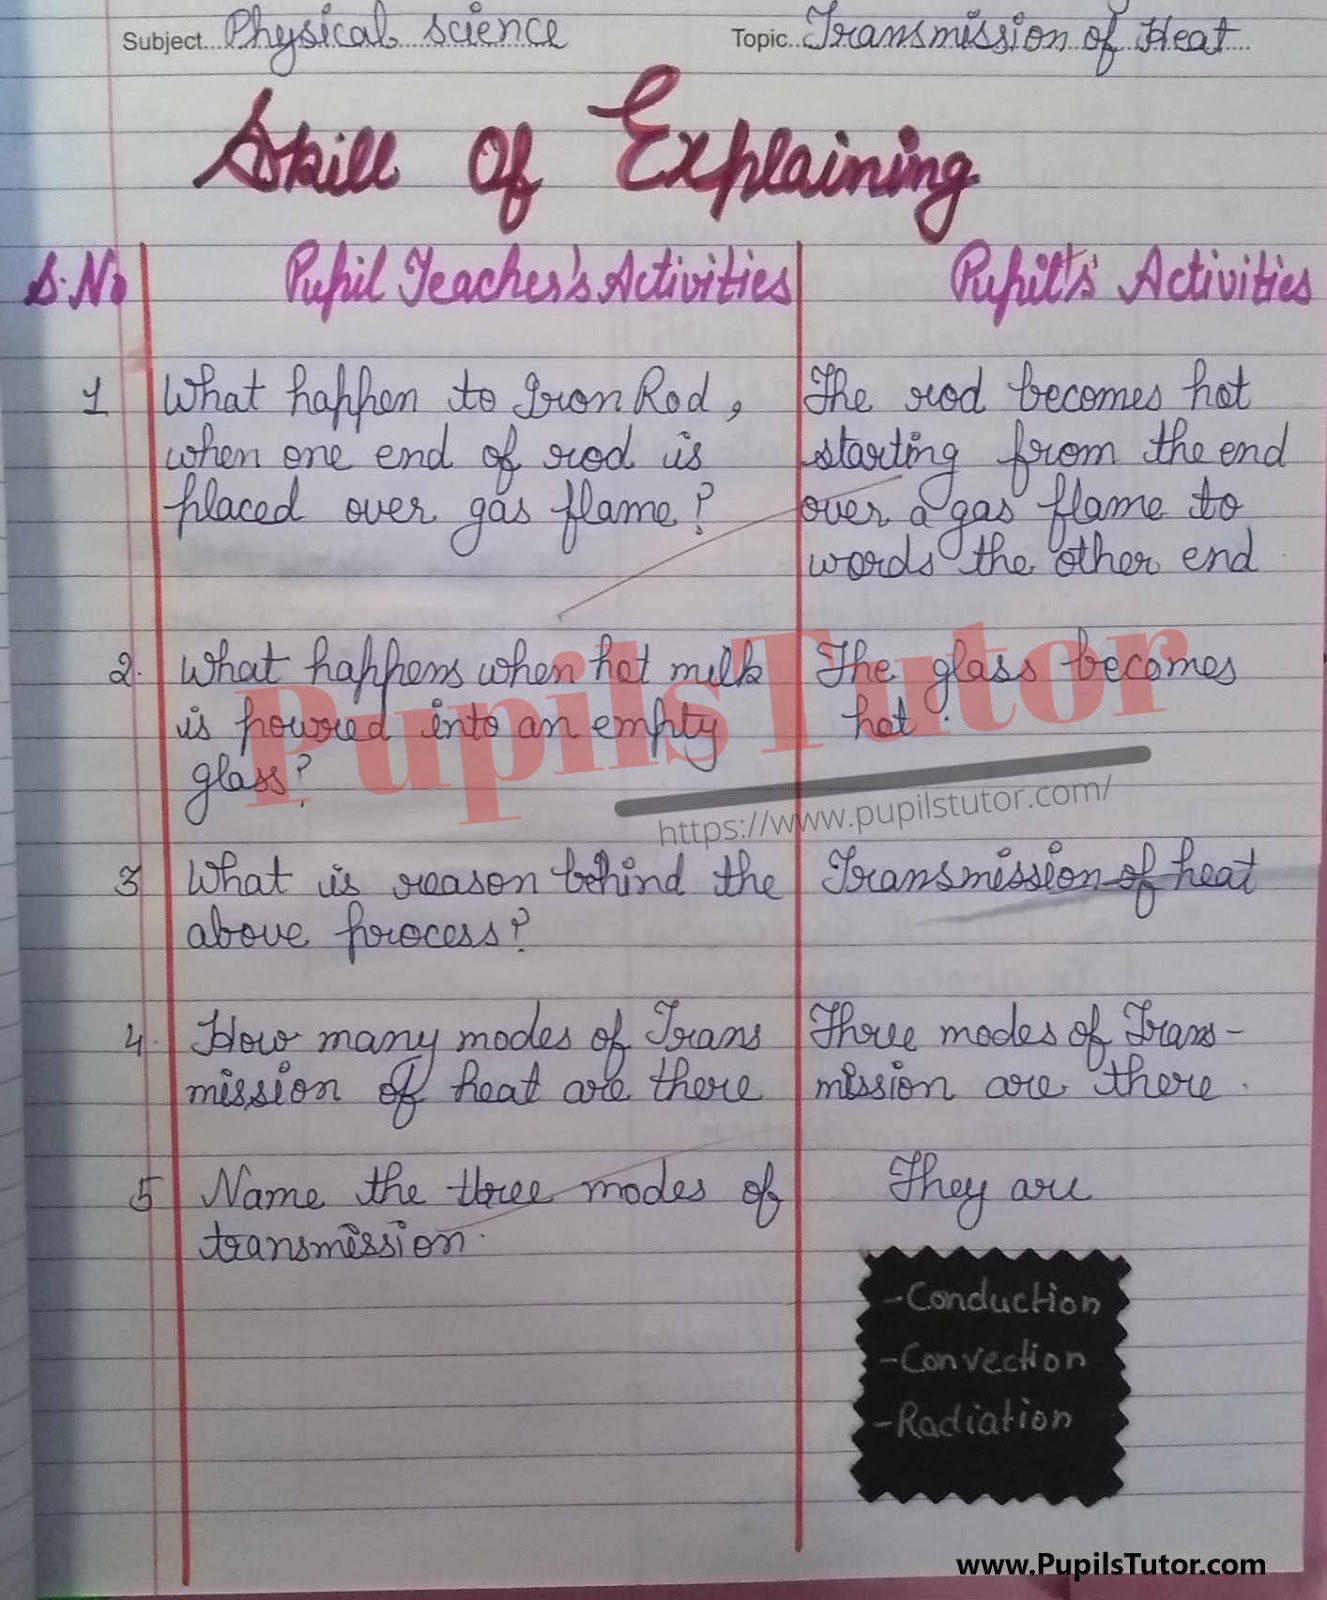 Transmission Of Heat Lesson Plan – (Page And Image Number 1) – Pupils Tutor